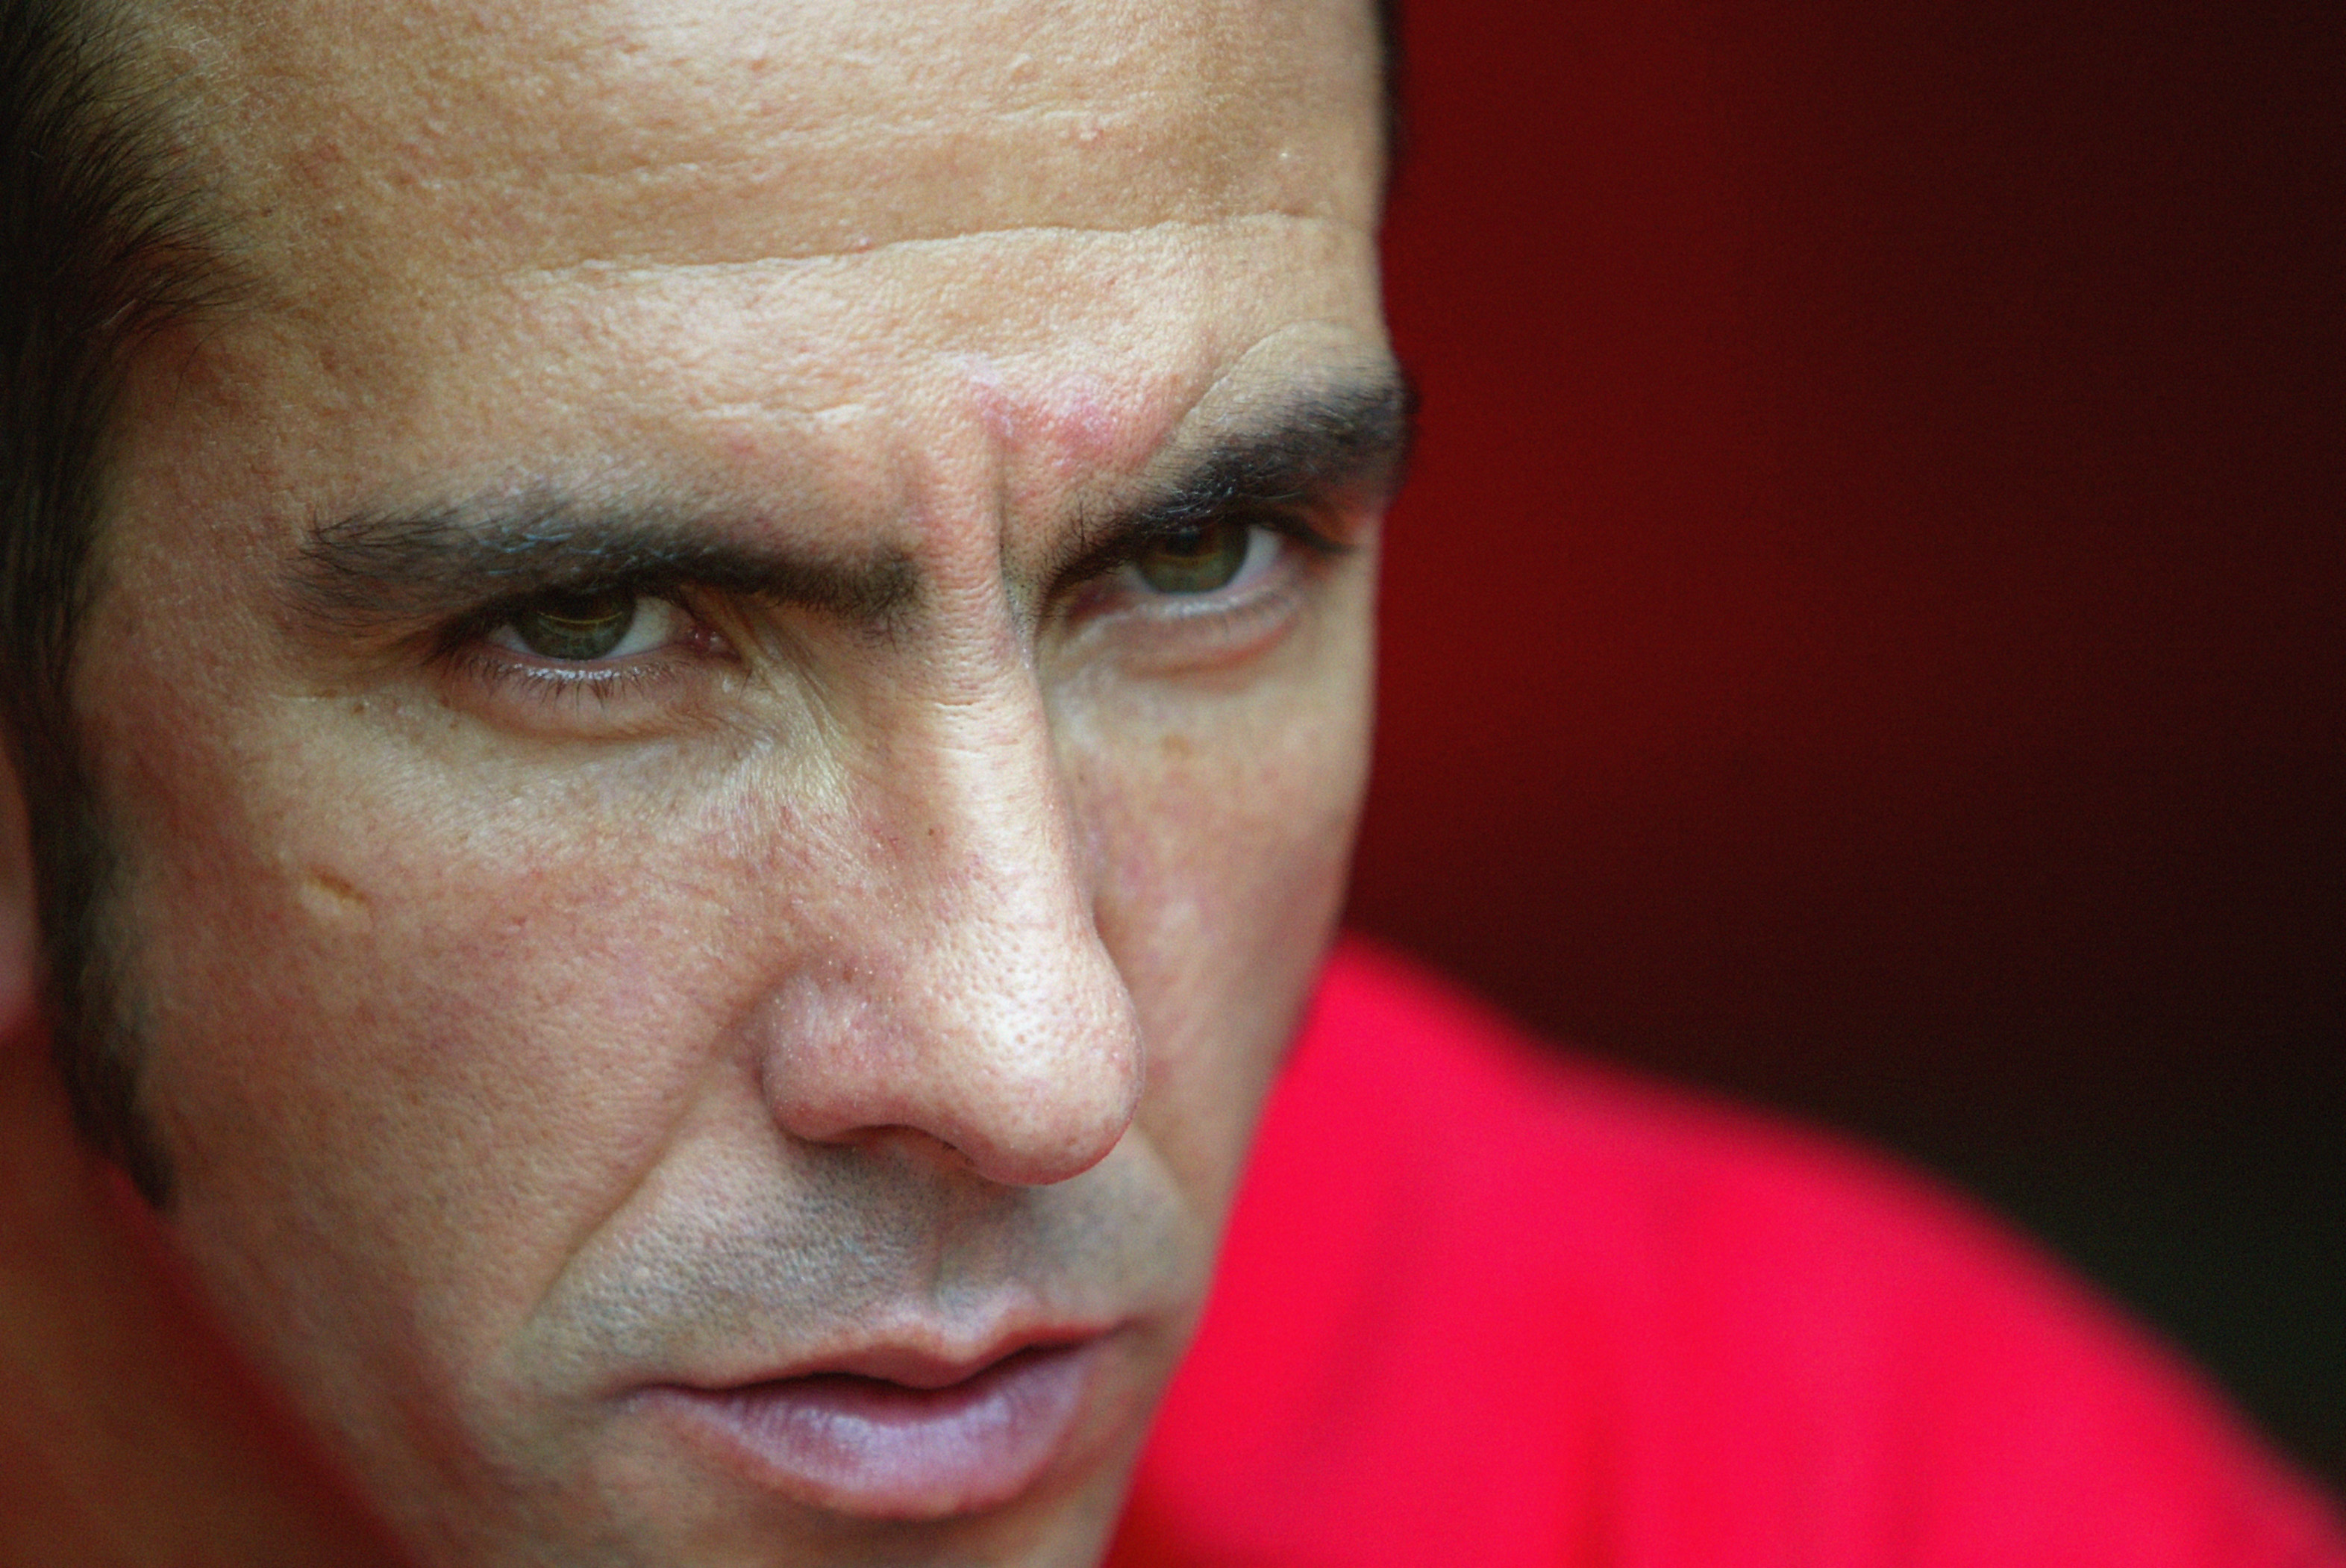 LONDON - SEPTEMBER 28:  Paolo Di Canio of Charlton Athletic looks on from the substitutes bench during the FA Barclaycard Premiership match between Charlton Athletic and Liverpool held on September 28, 2003 at The Valley, in London. Charlton Athletic won